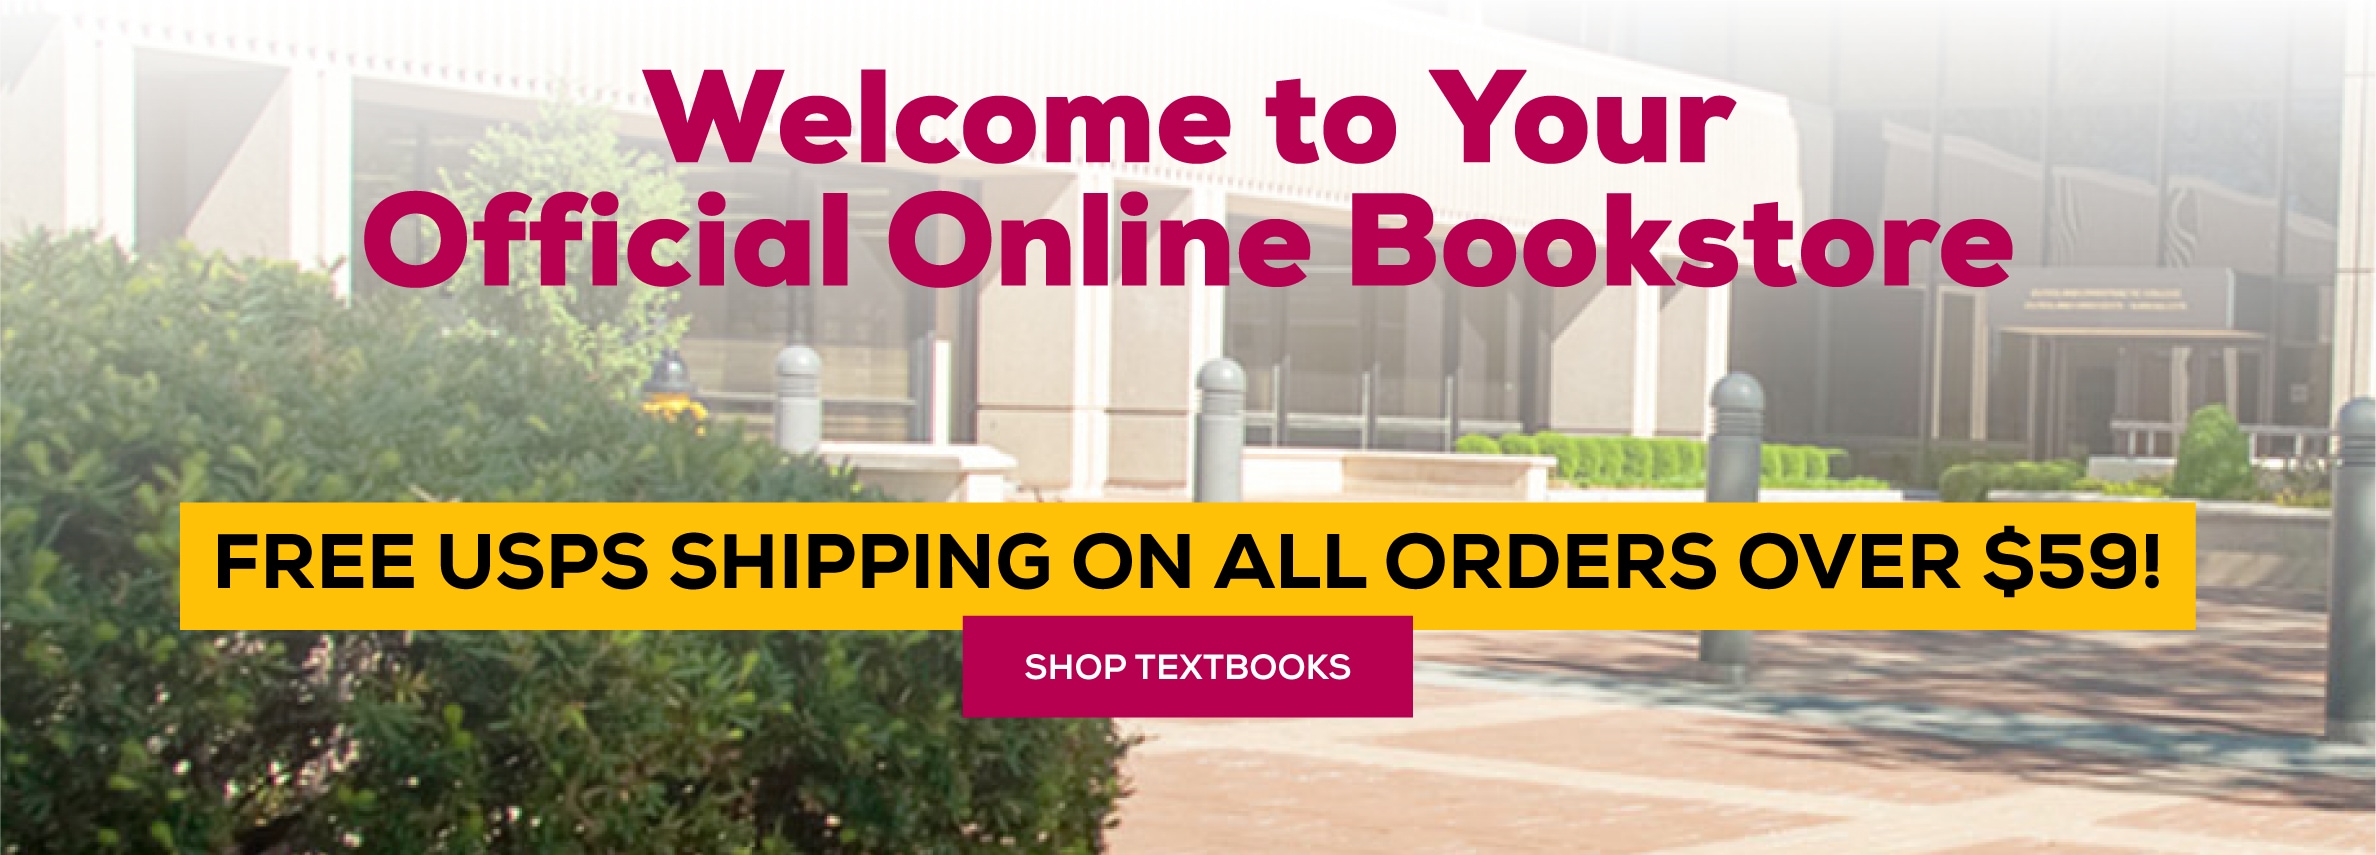 Welcome to your official online bookstore. Free USPS Shipping on all orders over $59! Shop Textbooks.